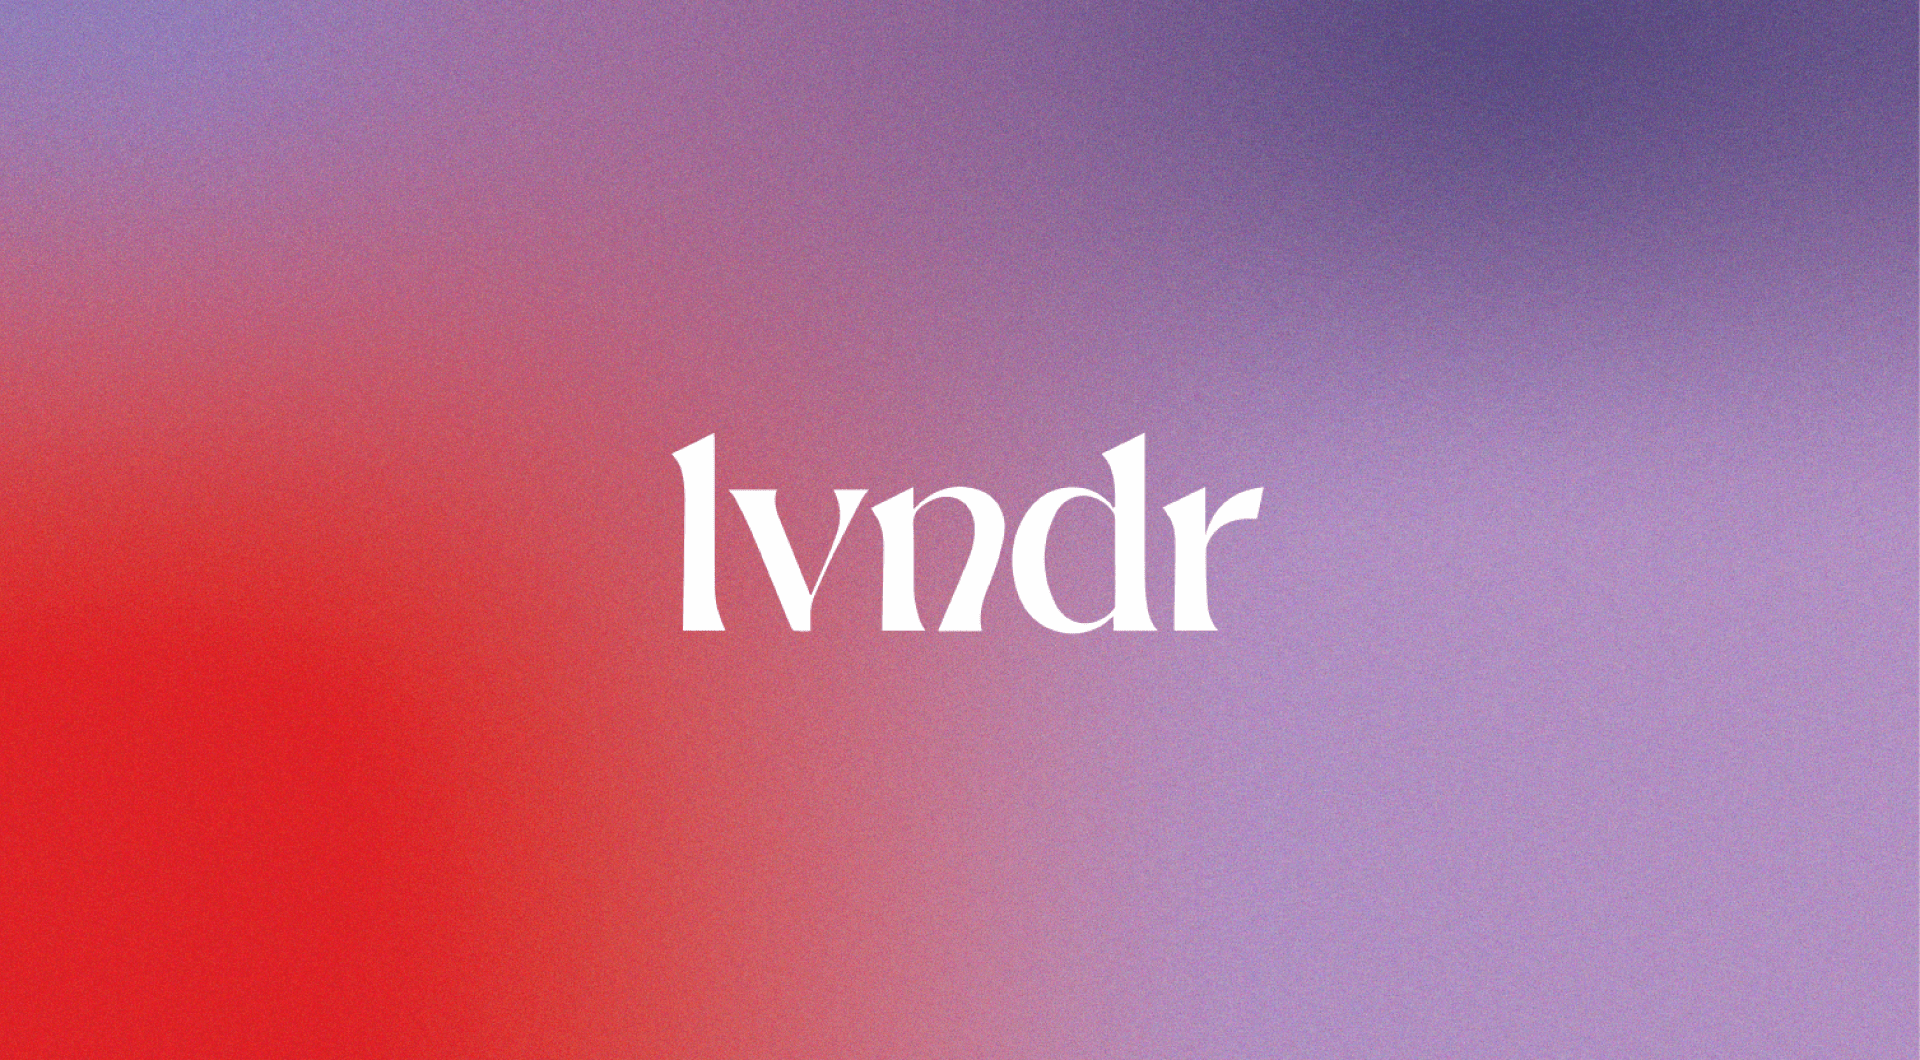 lvndr white logo on a red and purple gradient background